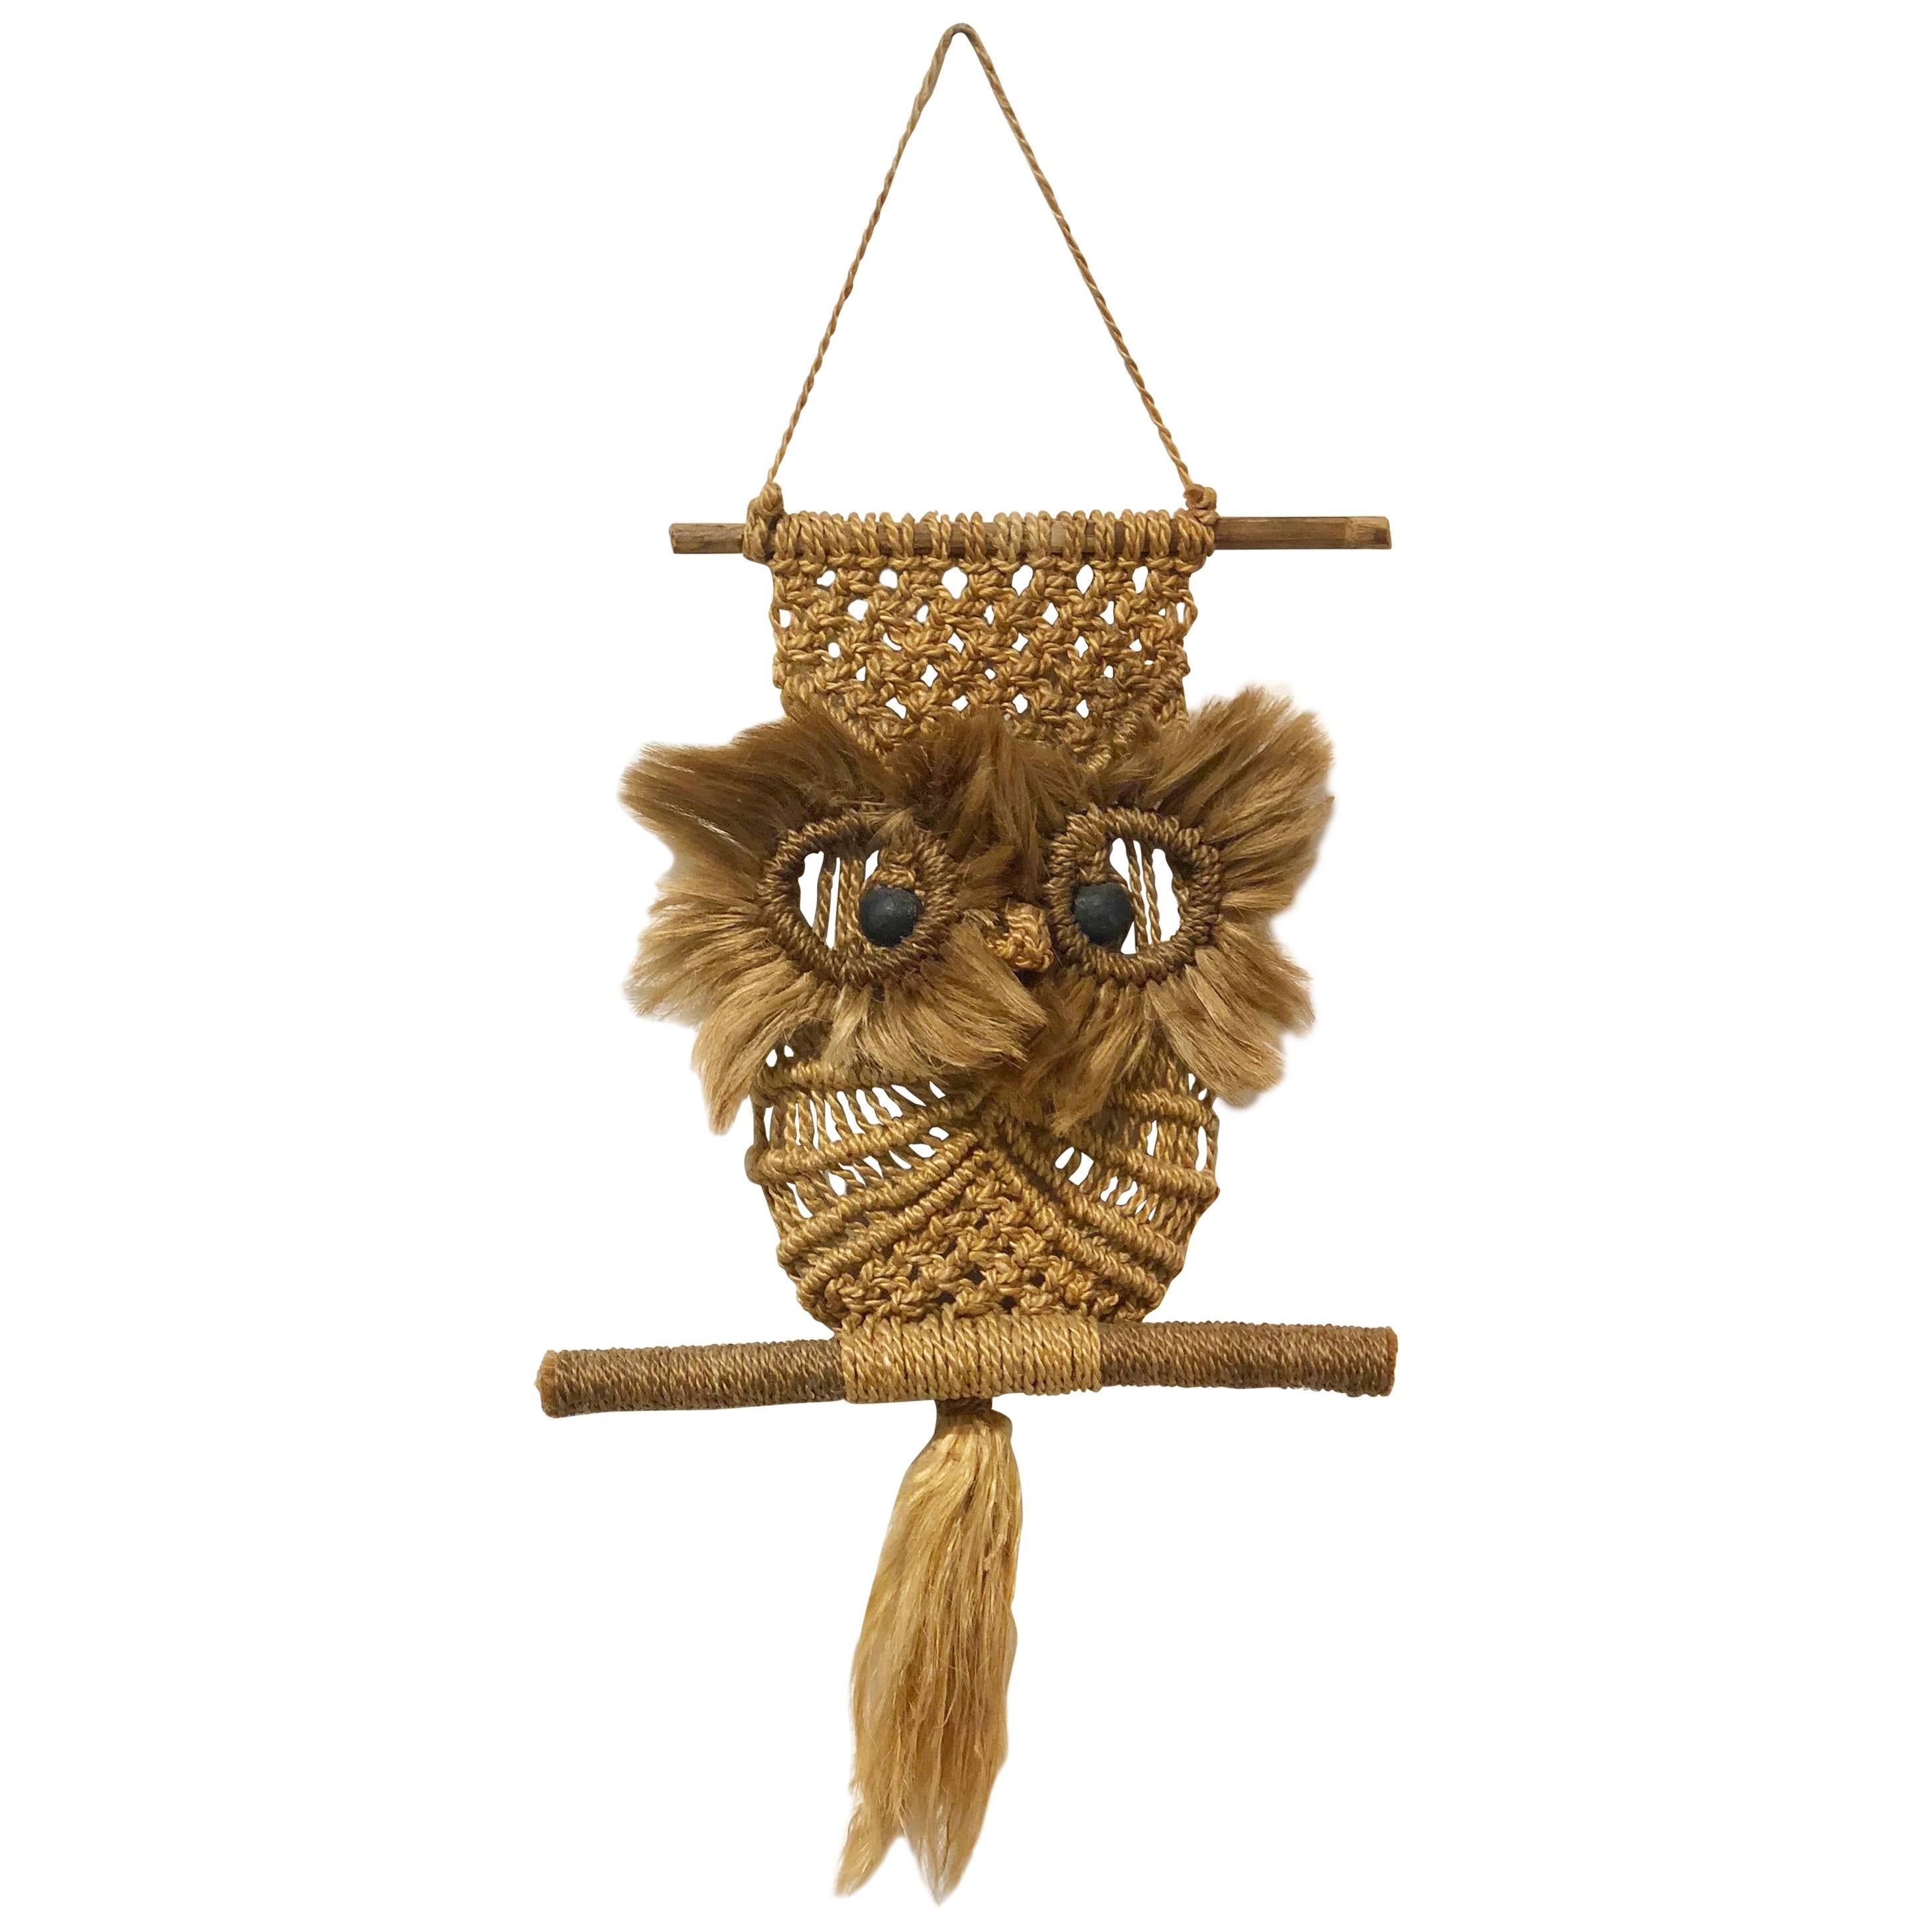 Whimsical 1970s Macrame Hippie Style Wall Hanging Owl